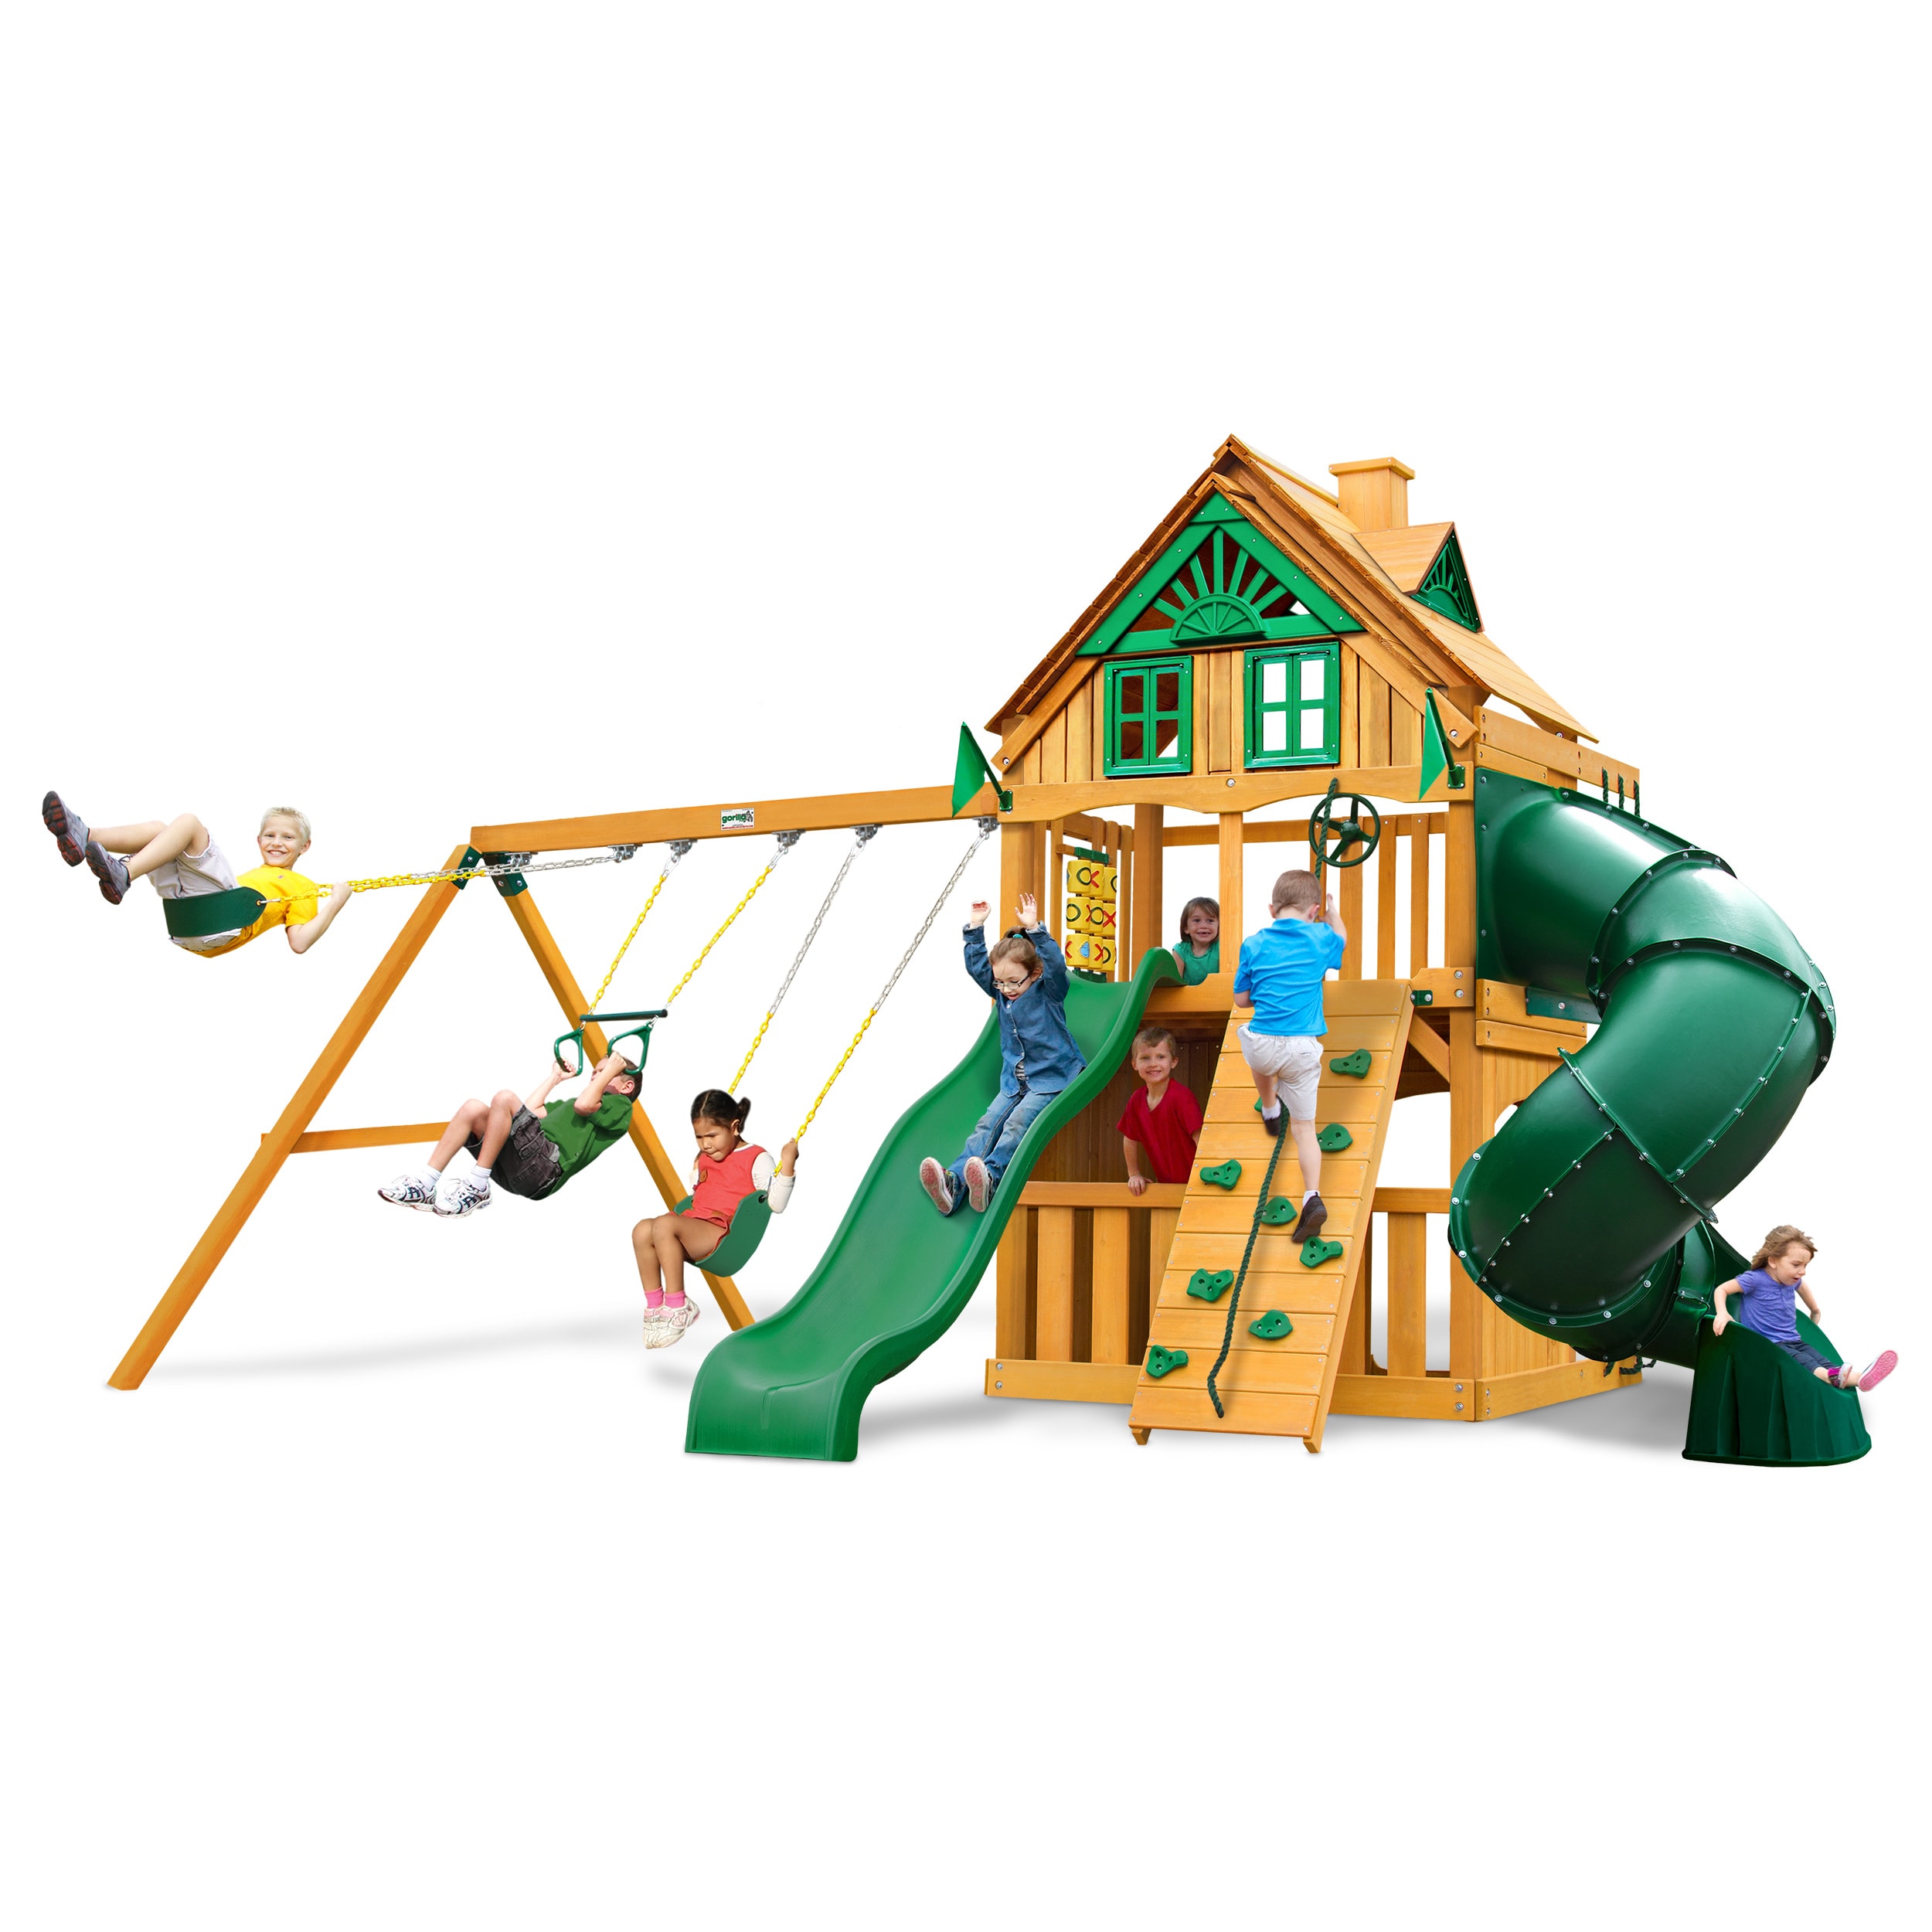 Gorilla Playsets Mountaineer Clubhouse Treehouse Swing Set with Amber Posts